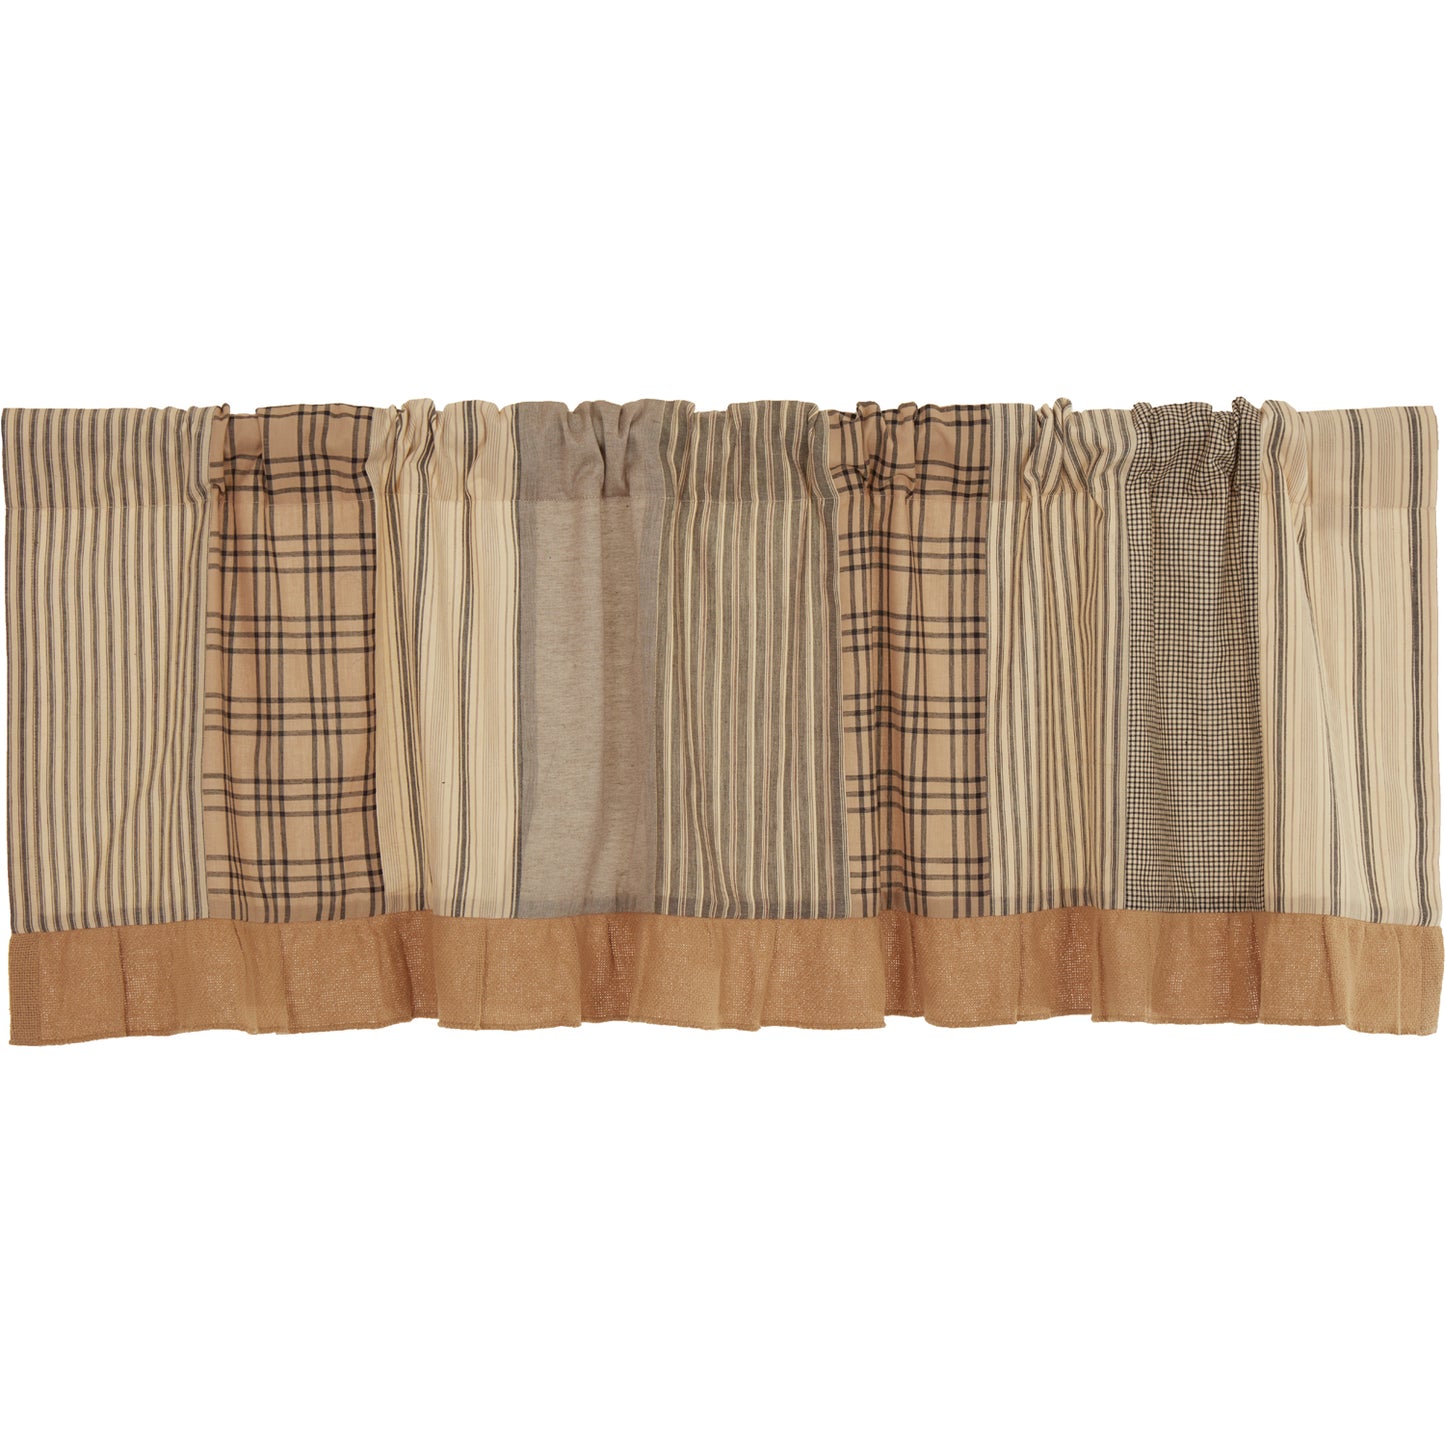 56758-Sawyer-Mill-Charcoal-Patchwork-Valance-19x60-image-6